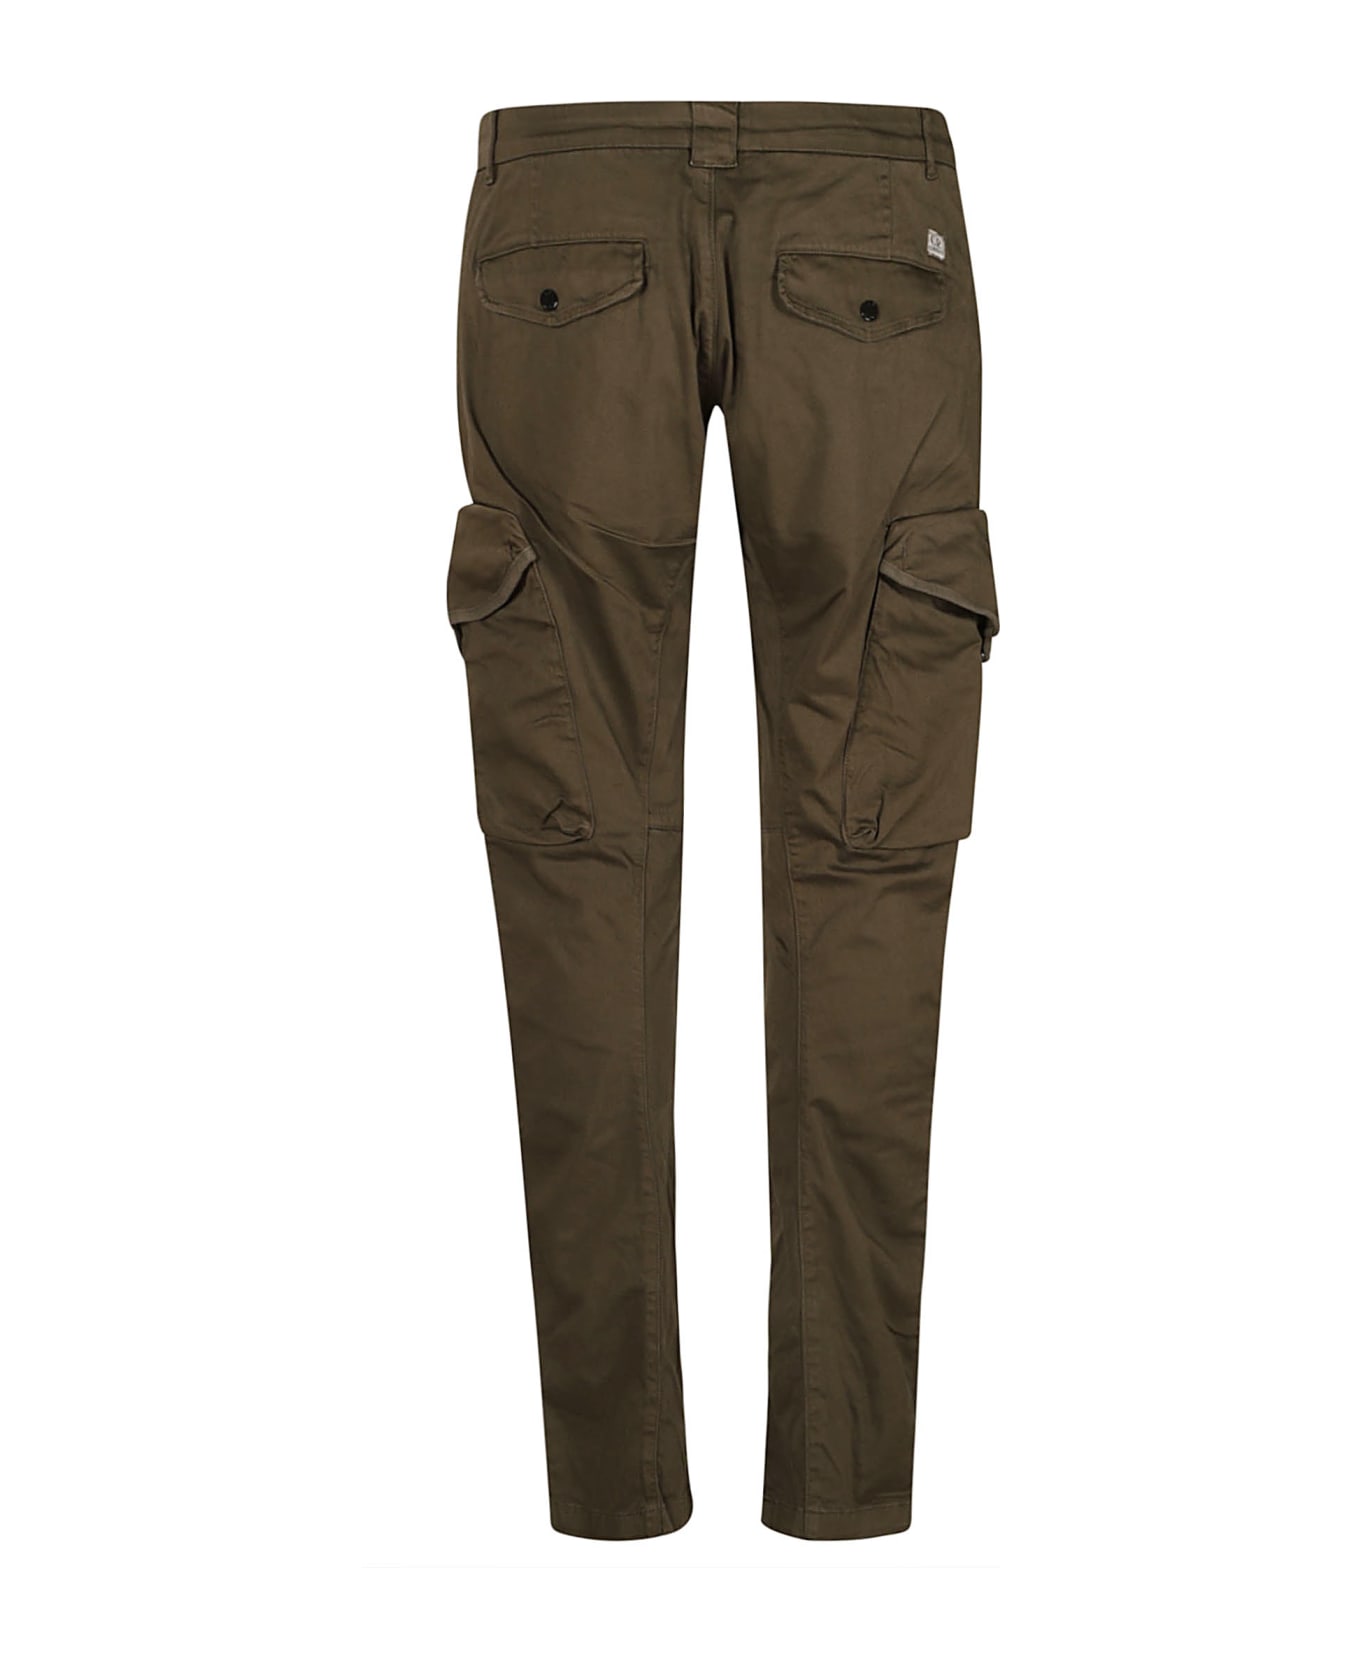 C.P. Company Cargo Buttoned Trousers - IVY GREEN ボトムス